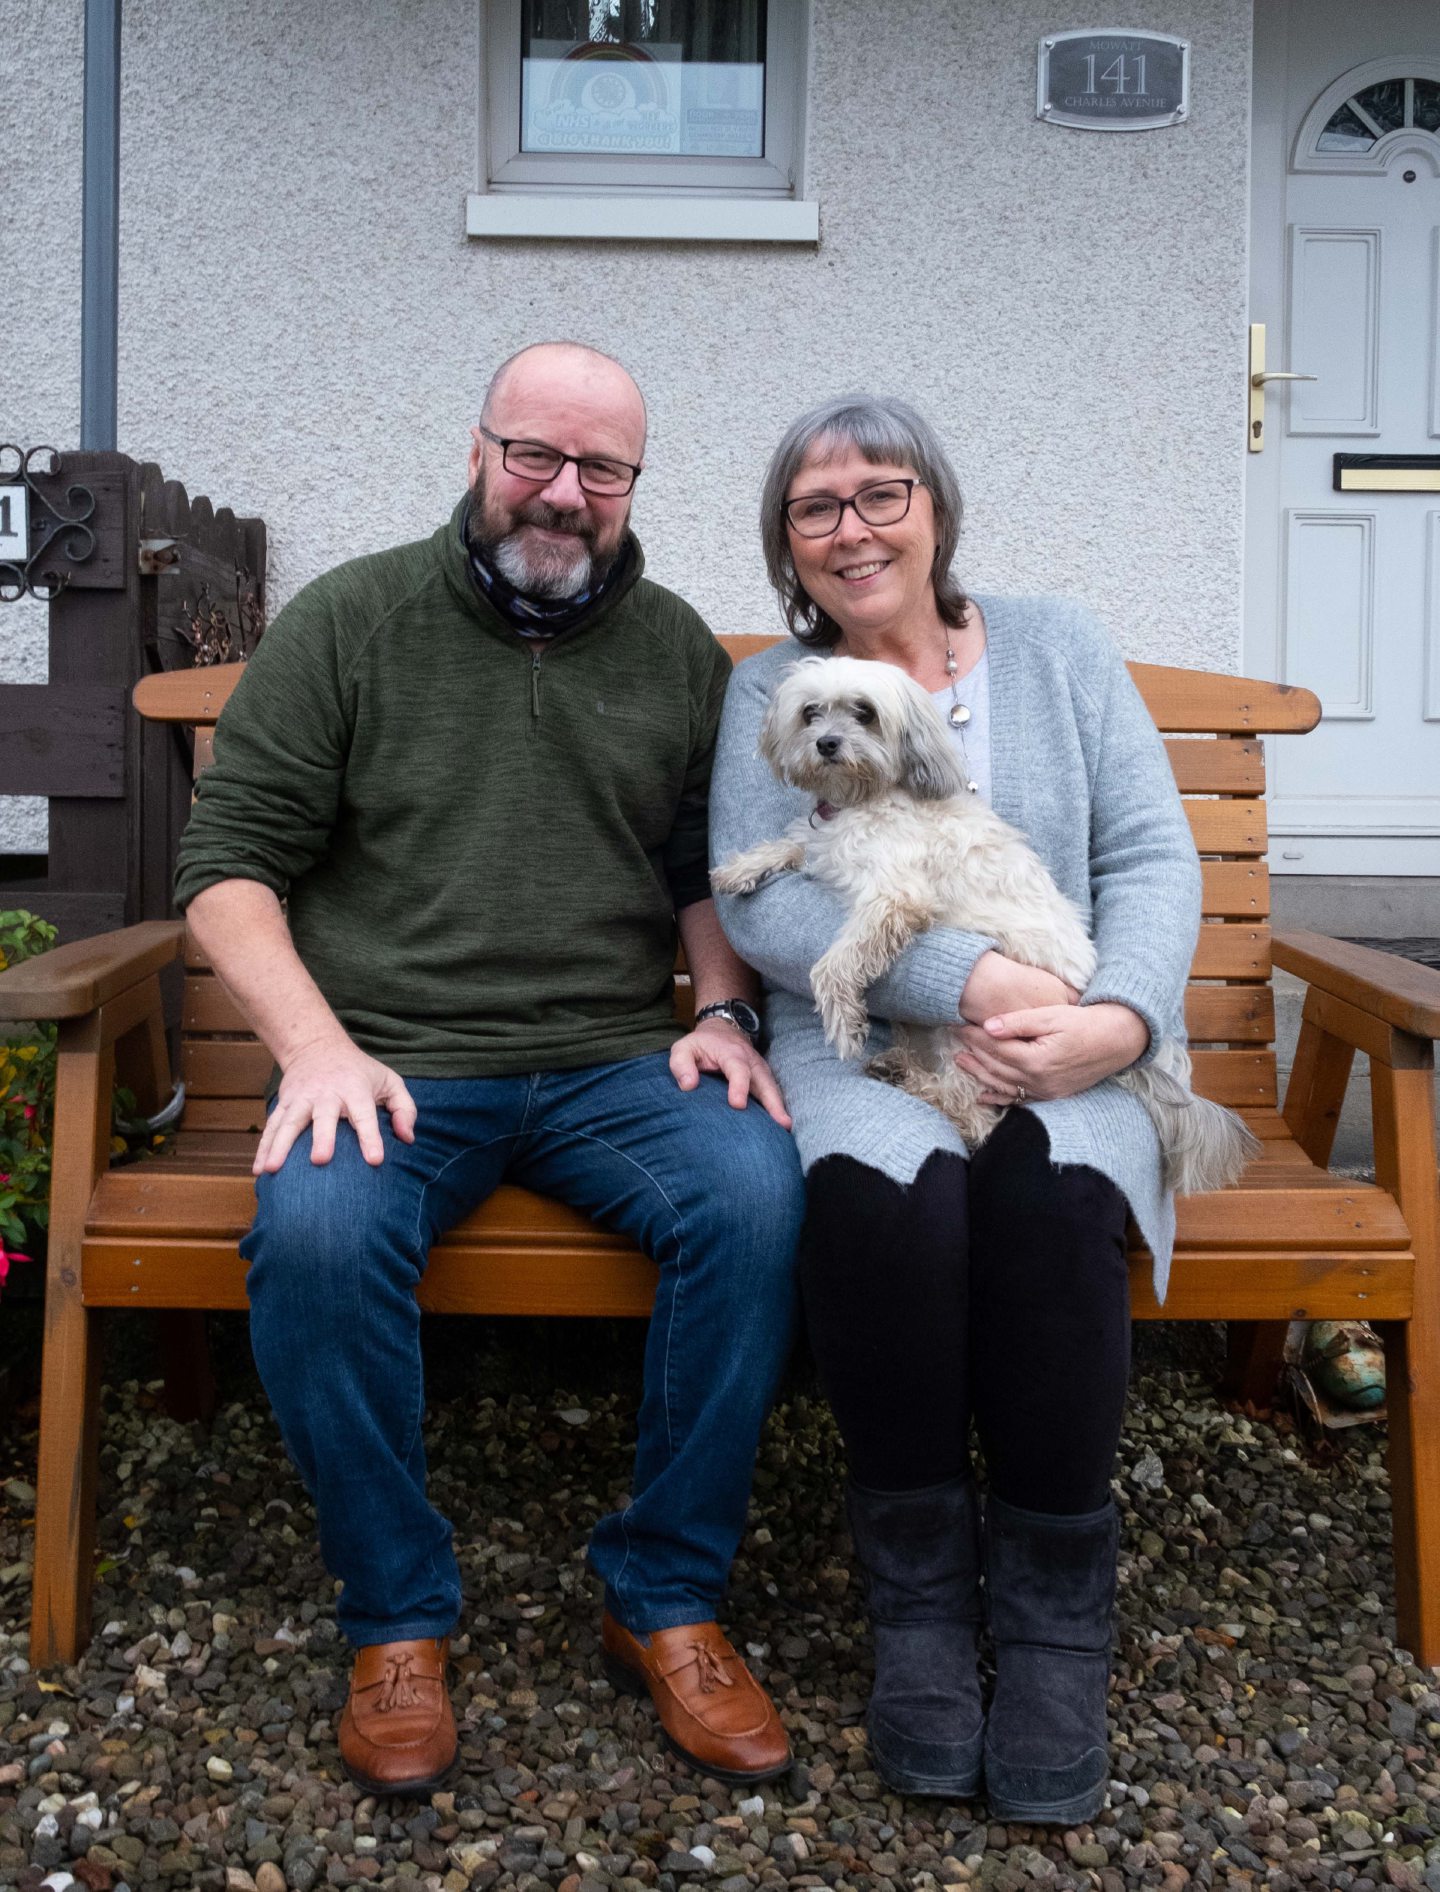 Arbroath man Alan Mowatt with wife Val after making his comeback in December 2020. Image: Paul Reid.